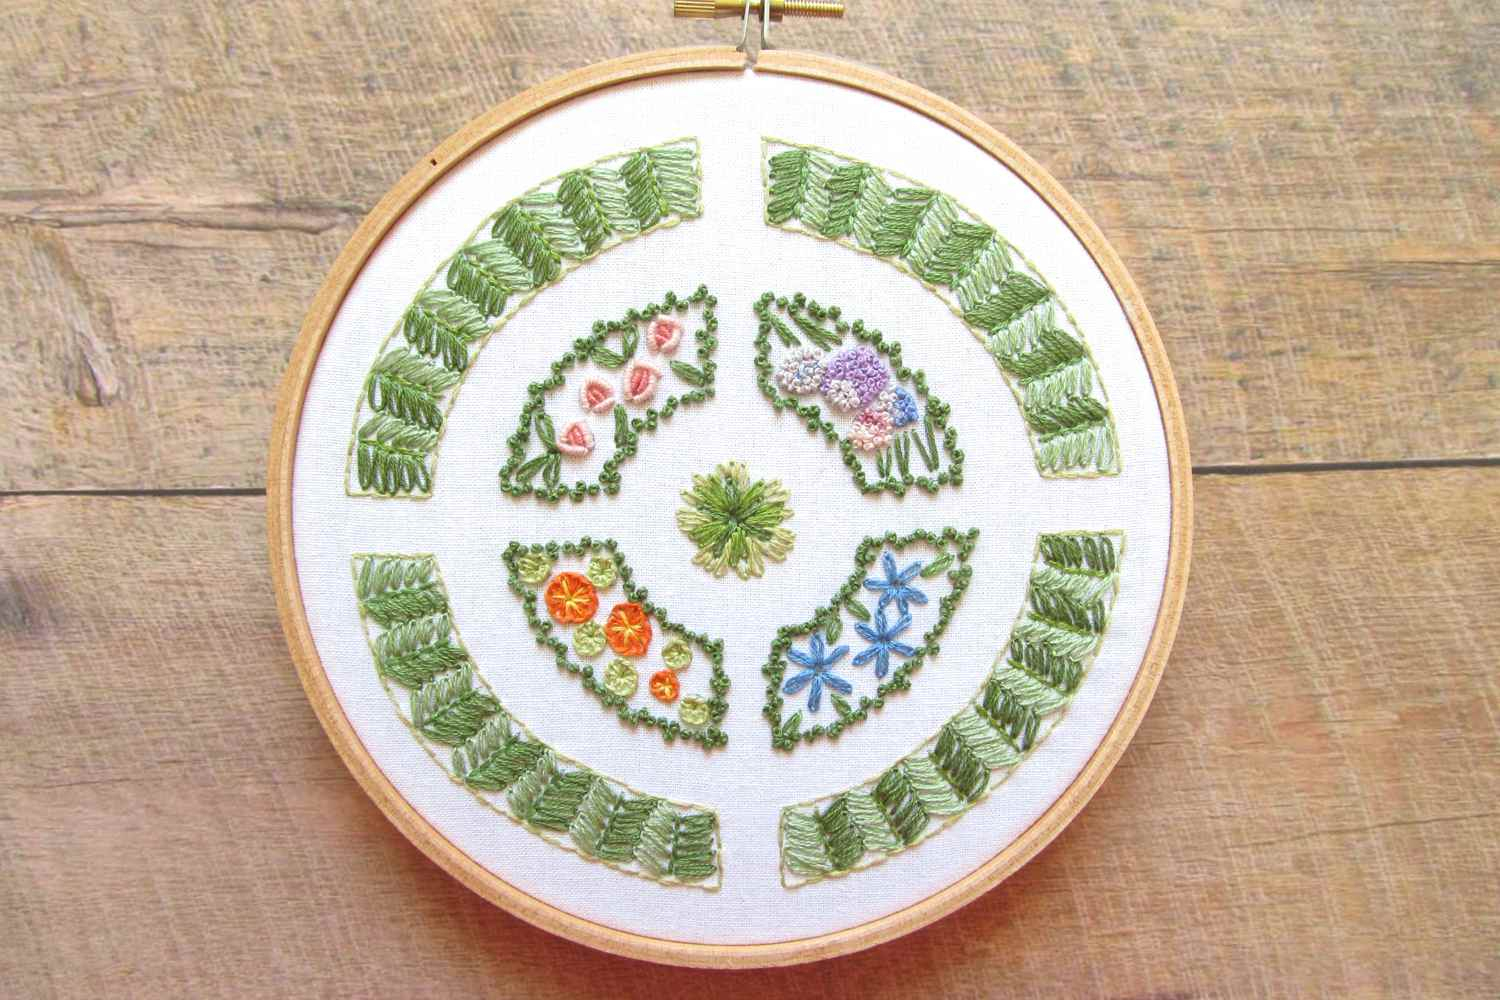 English Embroidery Patterns 10 Gardening Inspired Embroidery Patterns